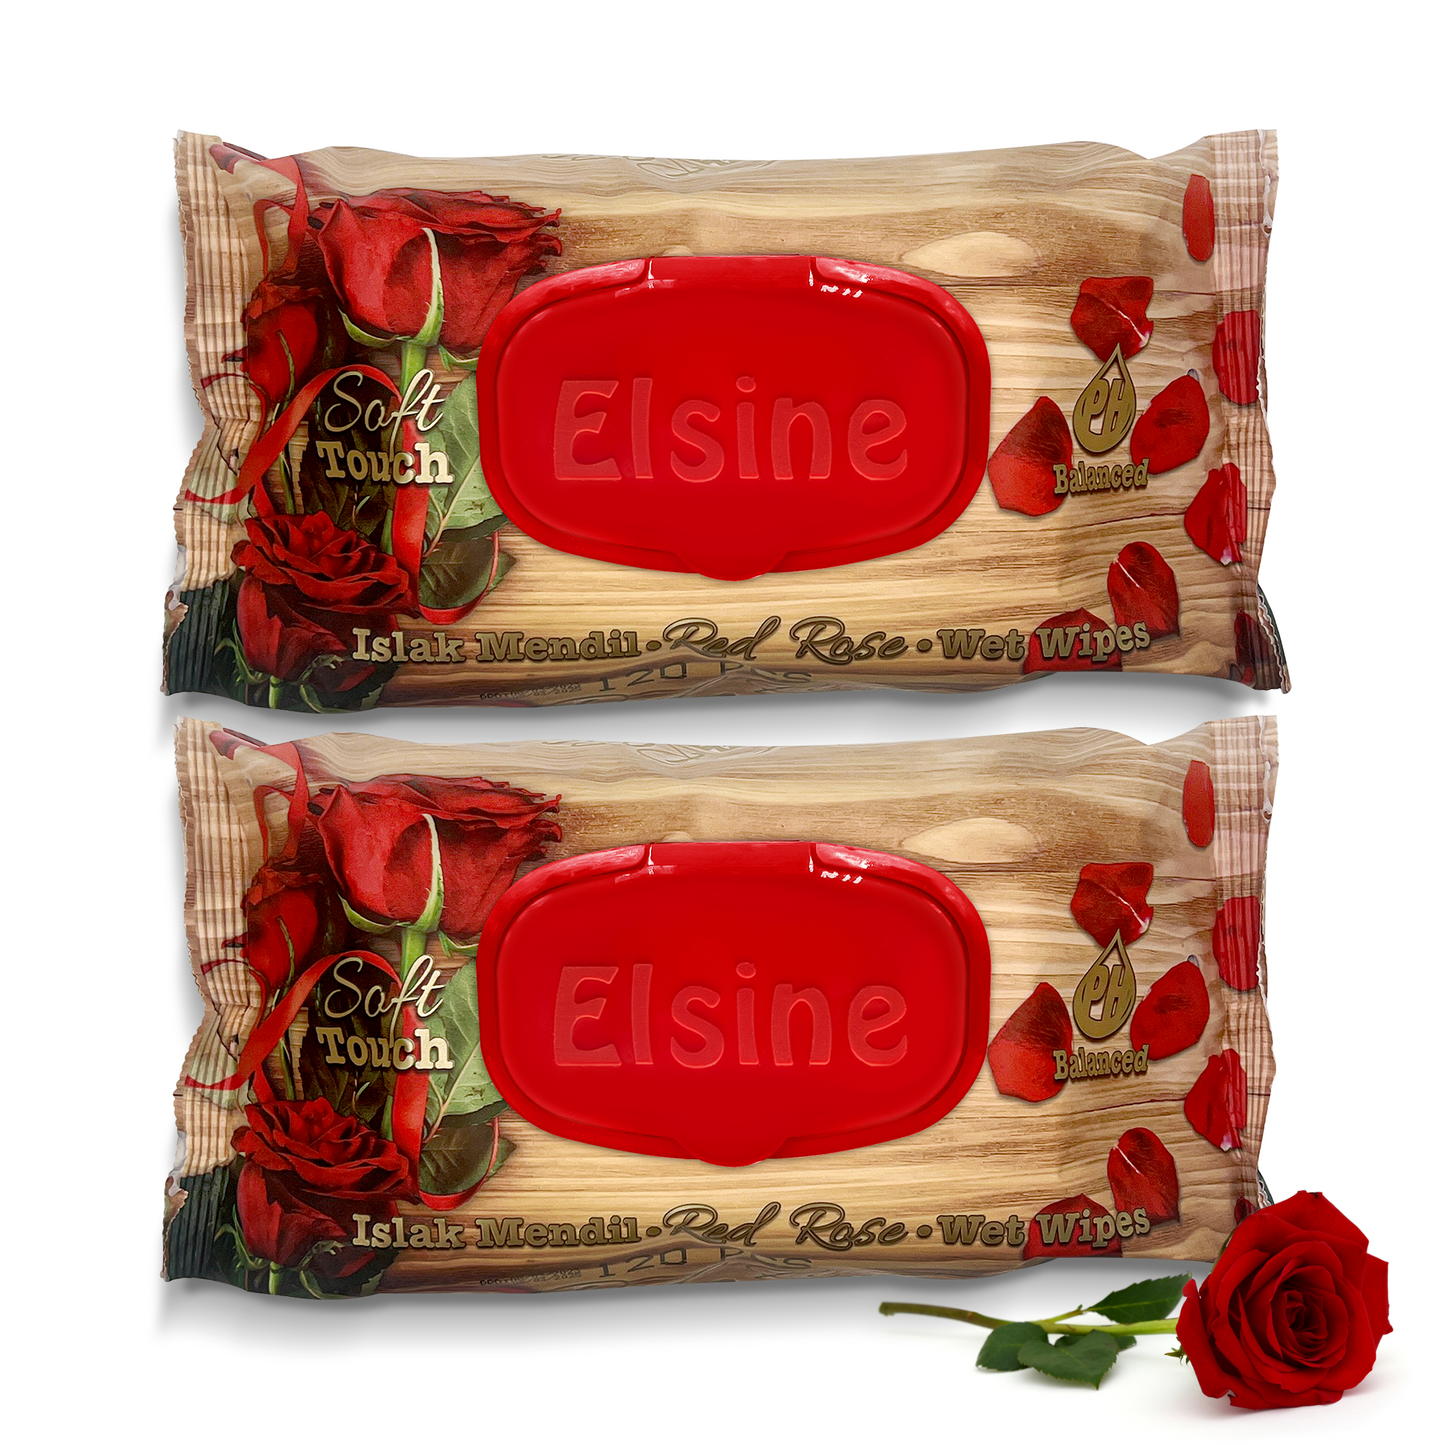 Red Rose Wet Wipes - 120 Sheets per Pack, Alcohol Free, Soft and Thick Waterwipes for Essential Personal Hygiene - 2 Packs